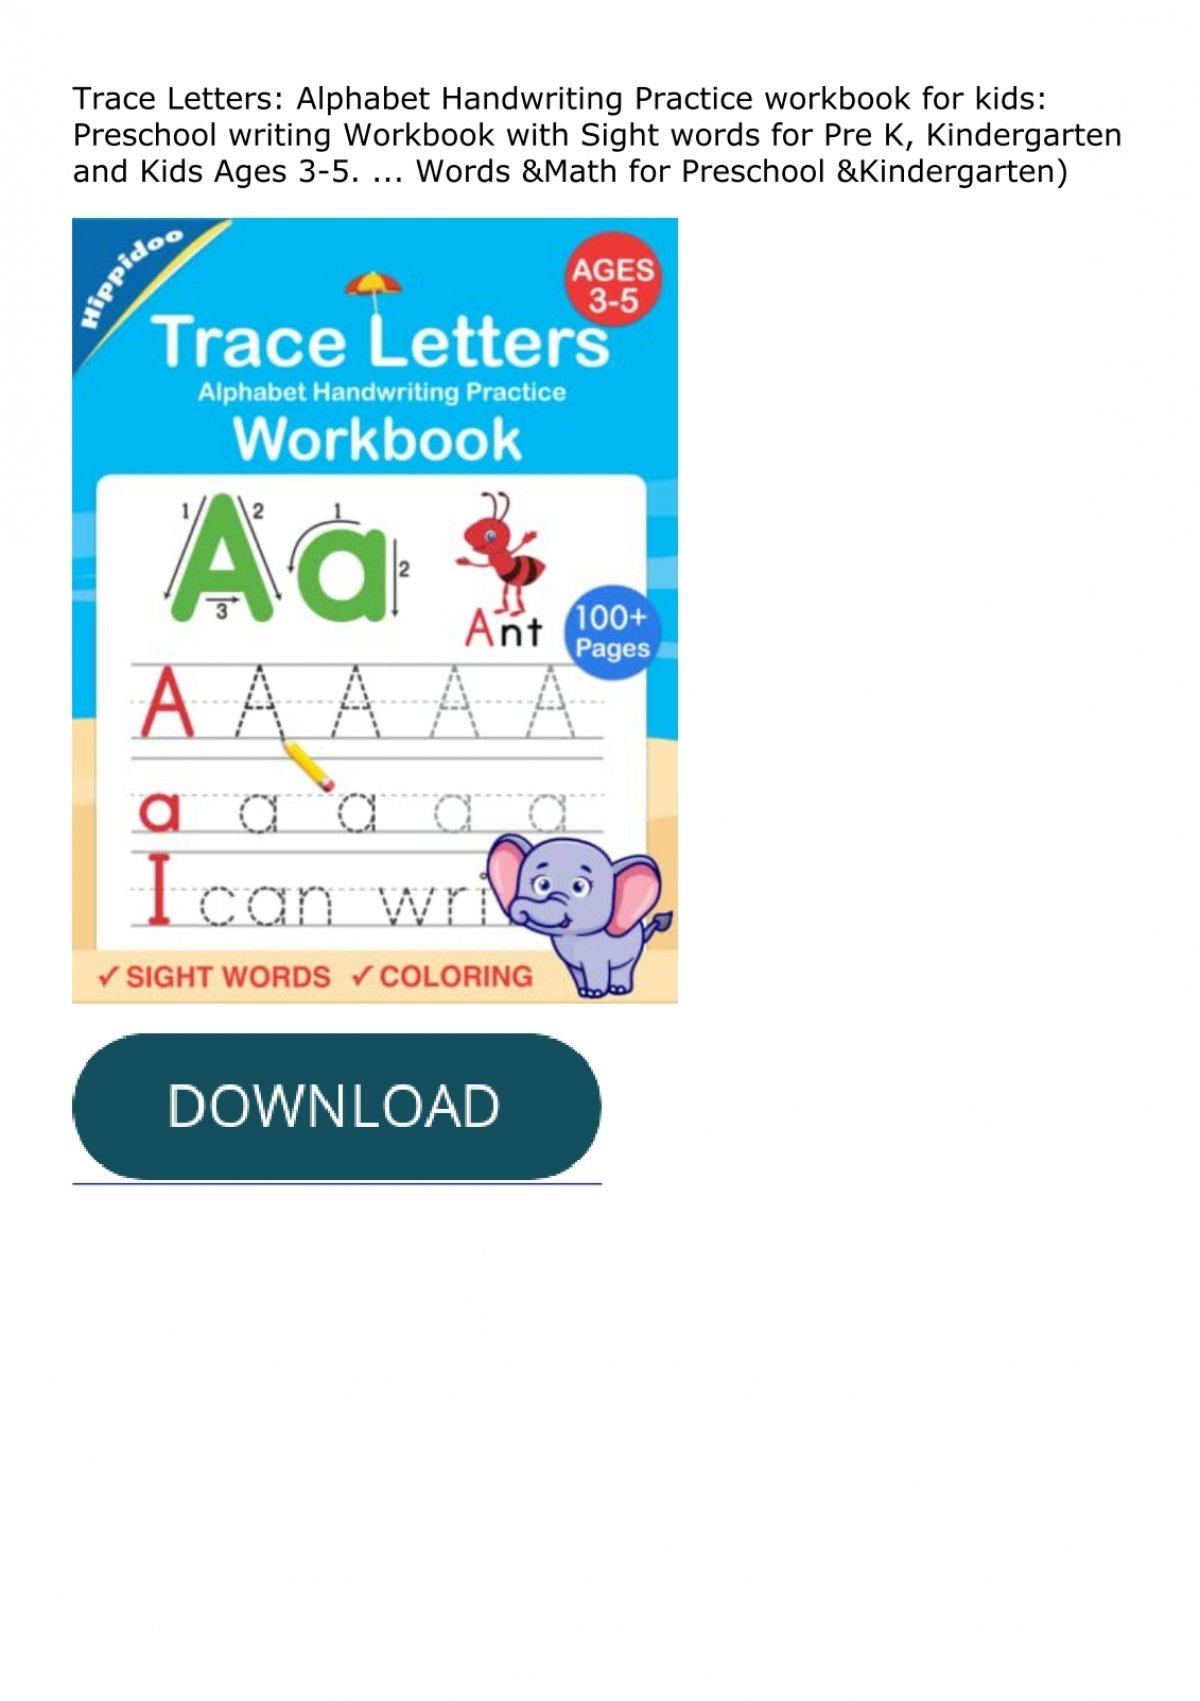 Trace Letters: Alphabet Handwriting Practice workbook for kids: Preschool  writing Workbook with Sight words for Pre K, Kindergarten and Kids Ages  3-5.